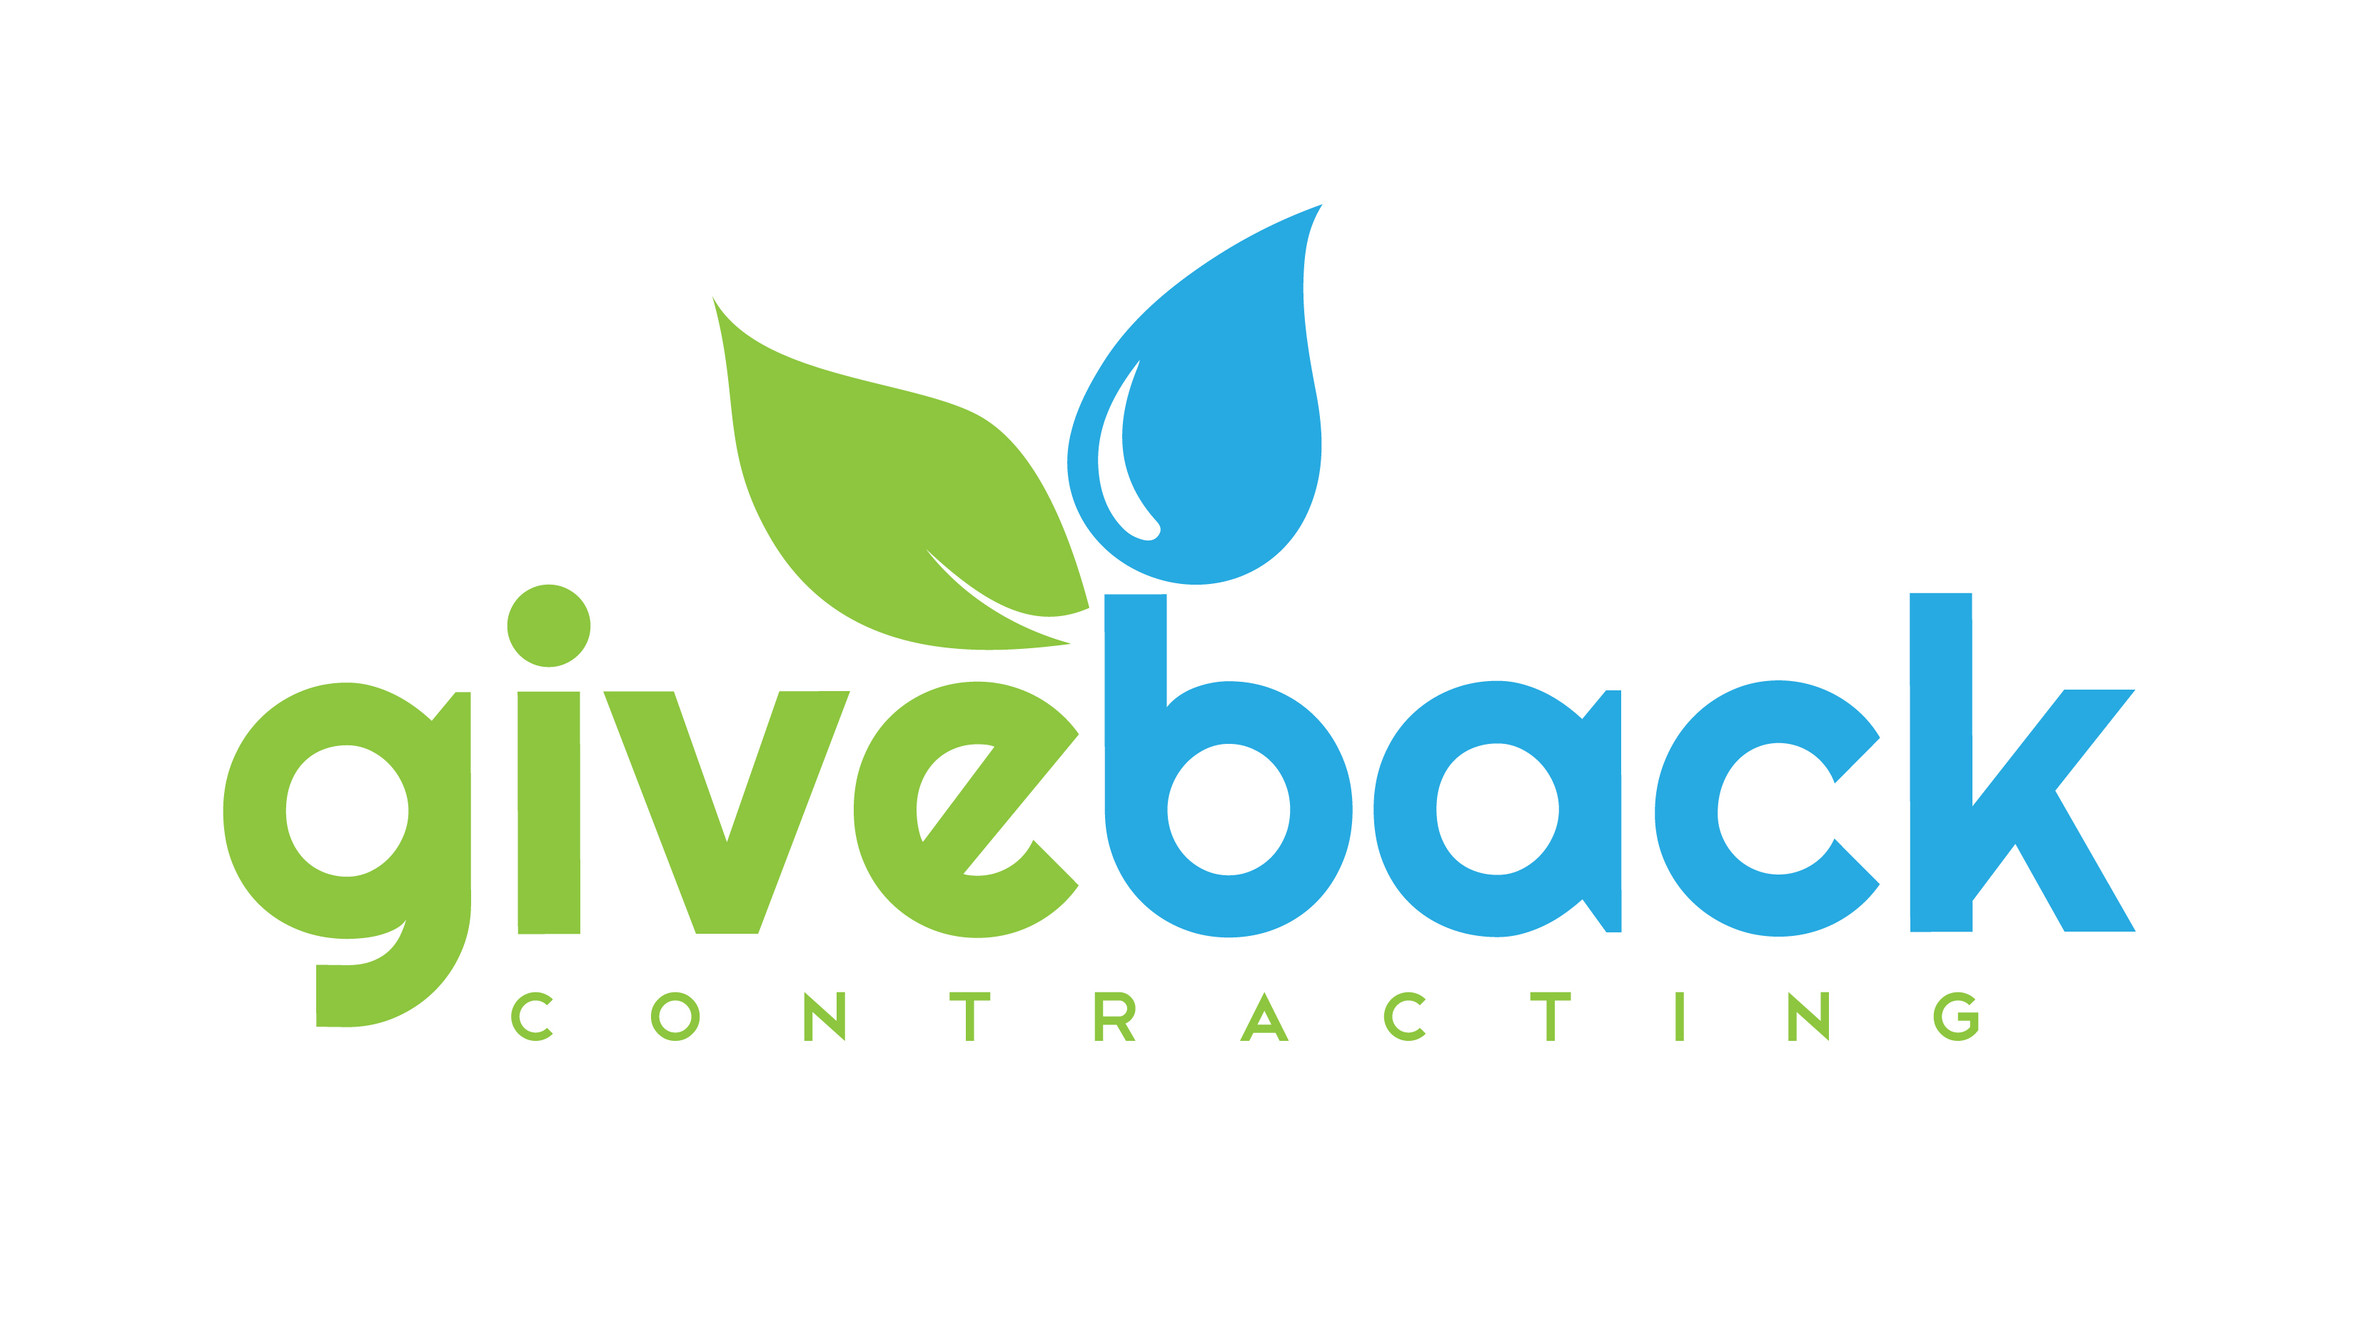 Give Back Contracting Ltd logo